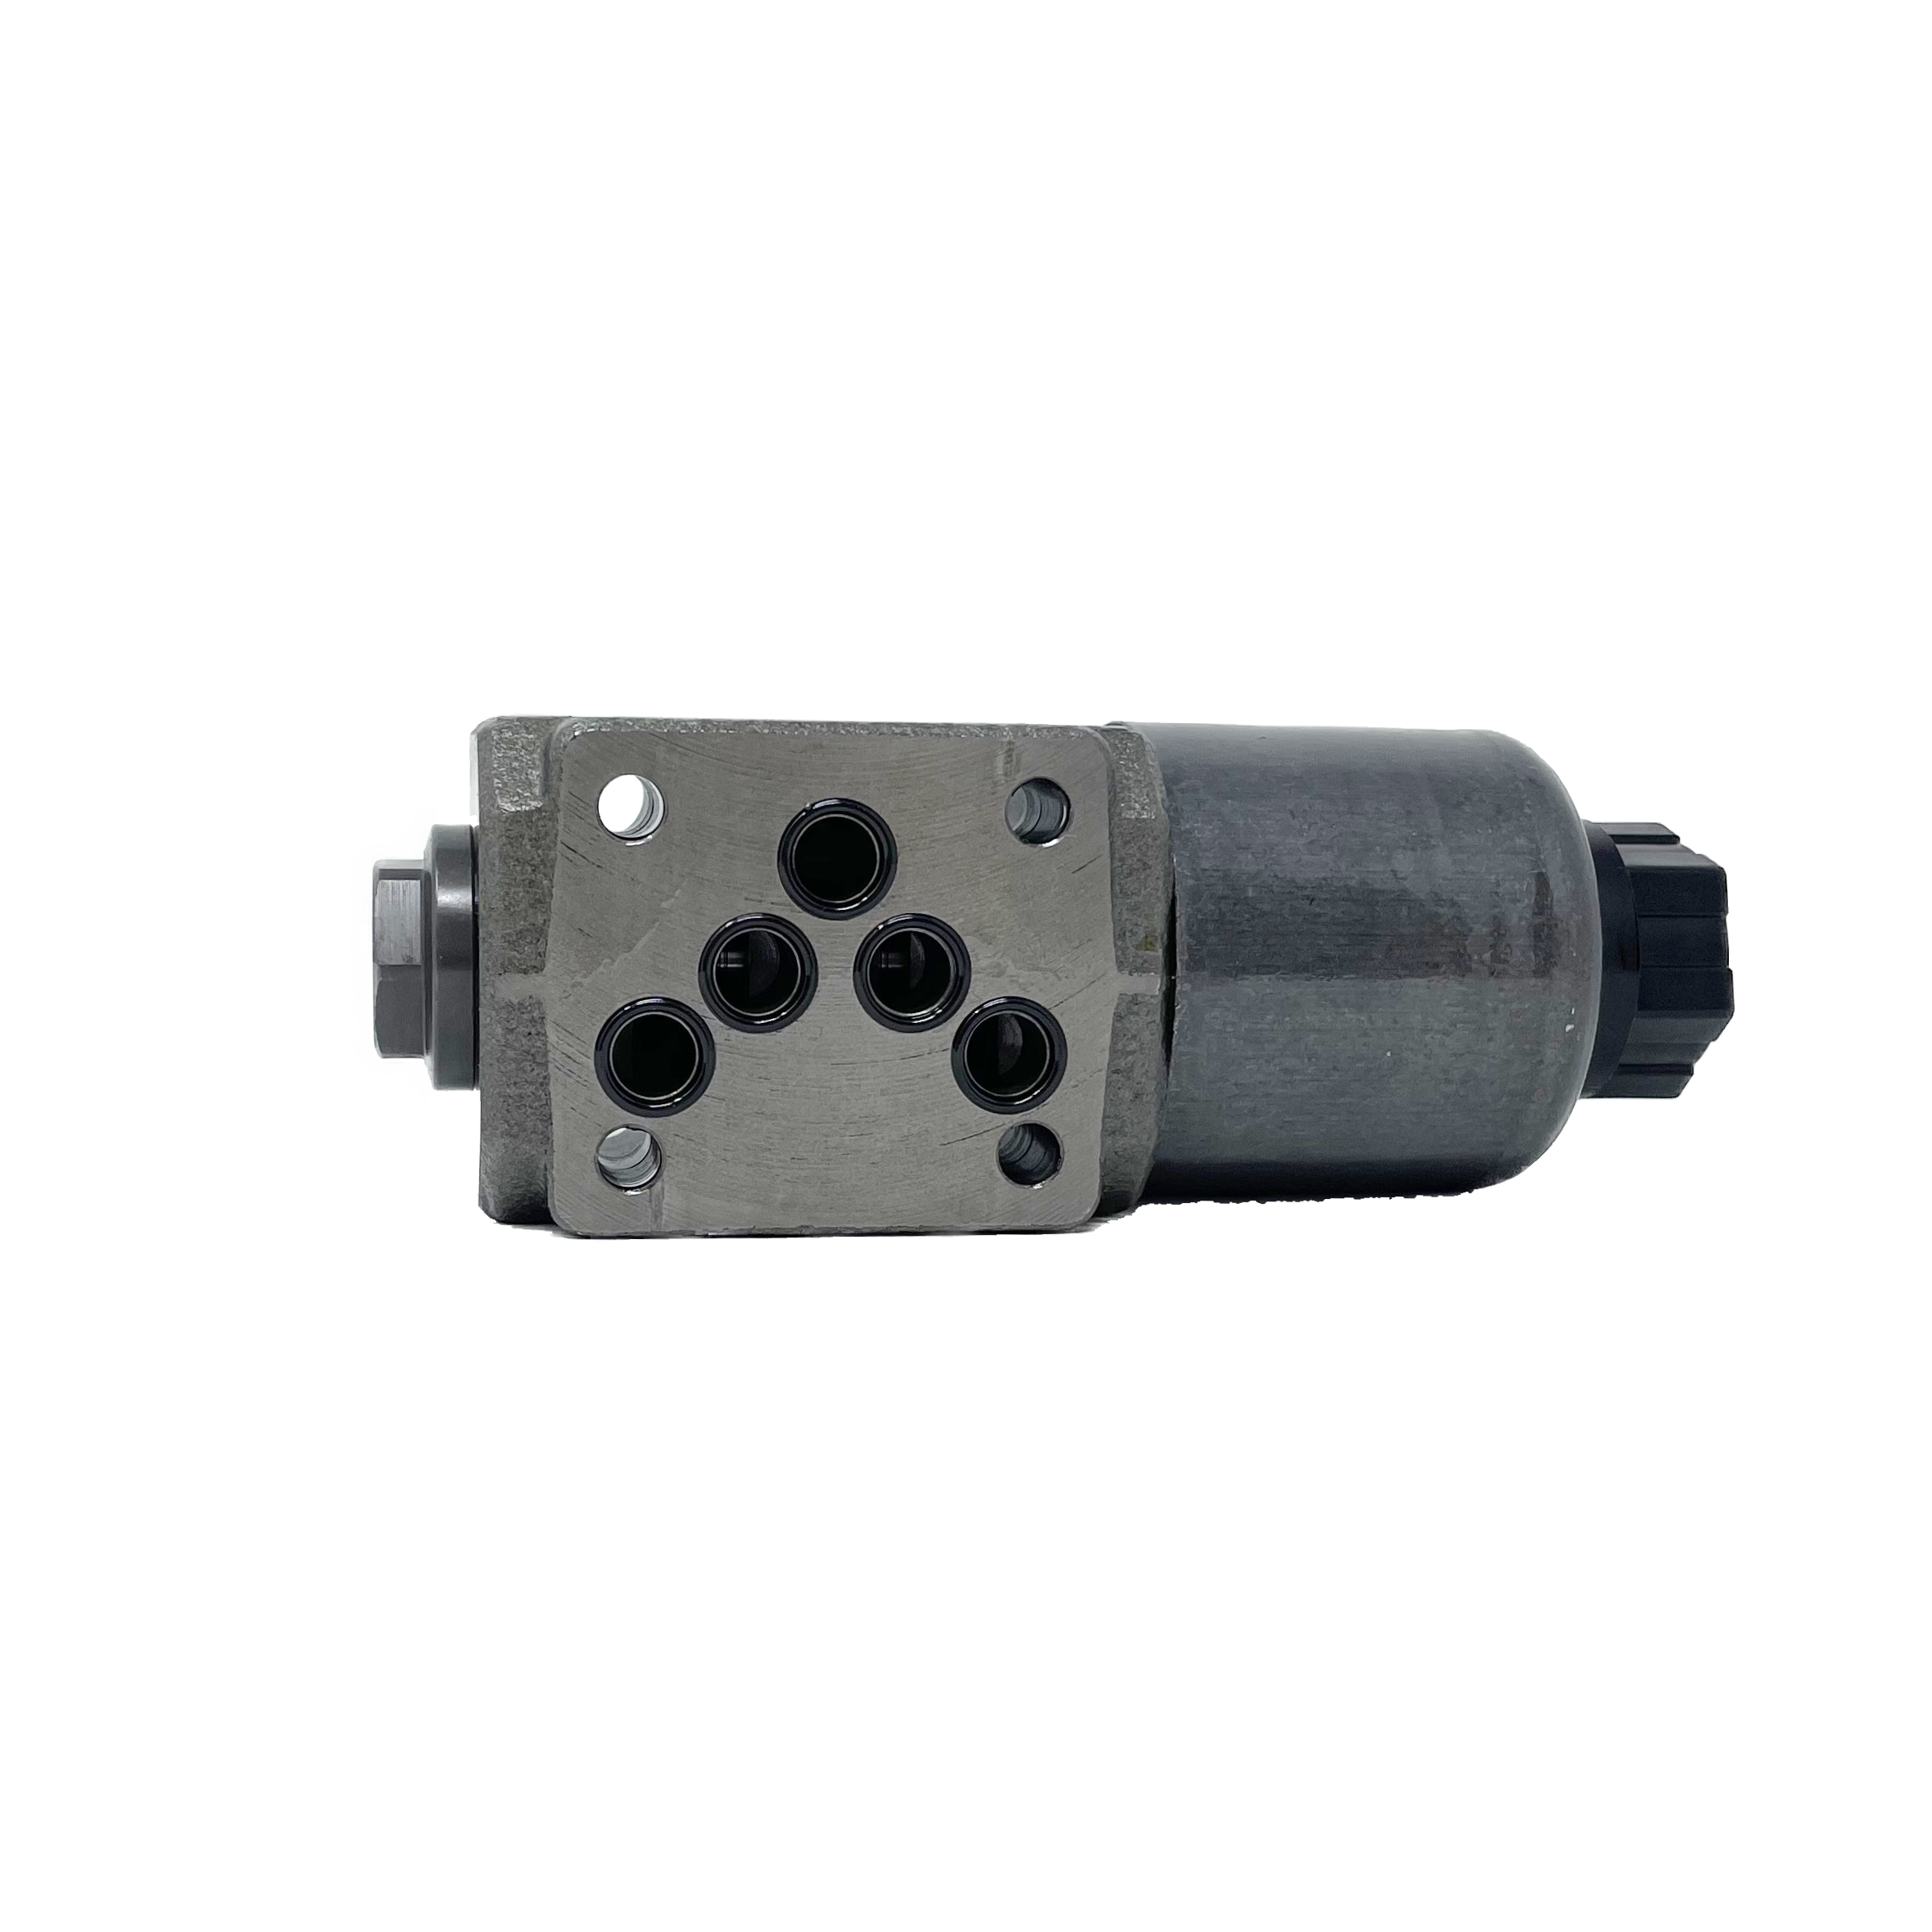 SA-G03-A3X-C115-E21 : Nachi Solenoid Valve, 3P4W, D05 (NG10), 34.3GPM, 5075psi, P to A, B to T in Neutral, 110 VAC, DIN